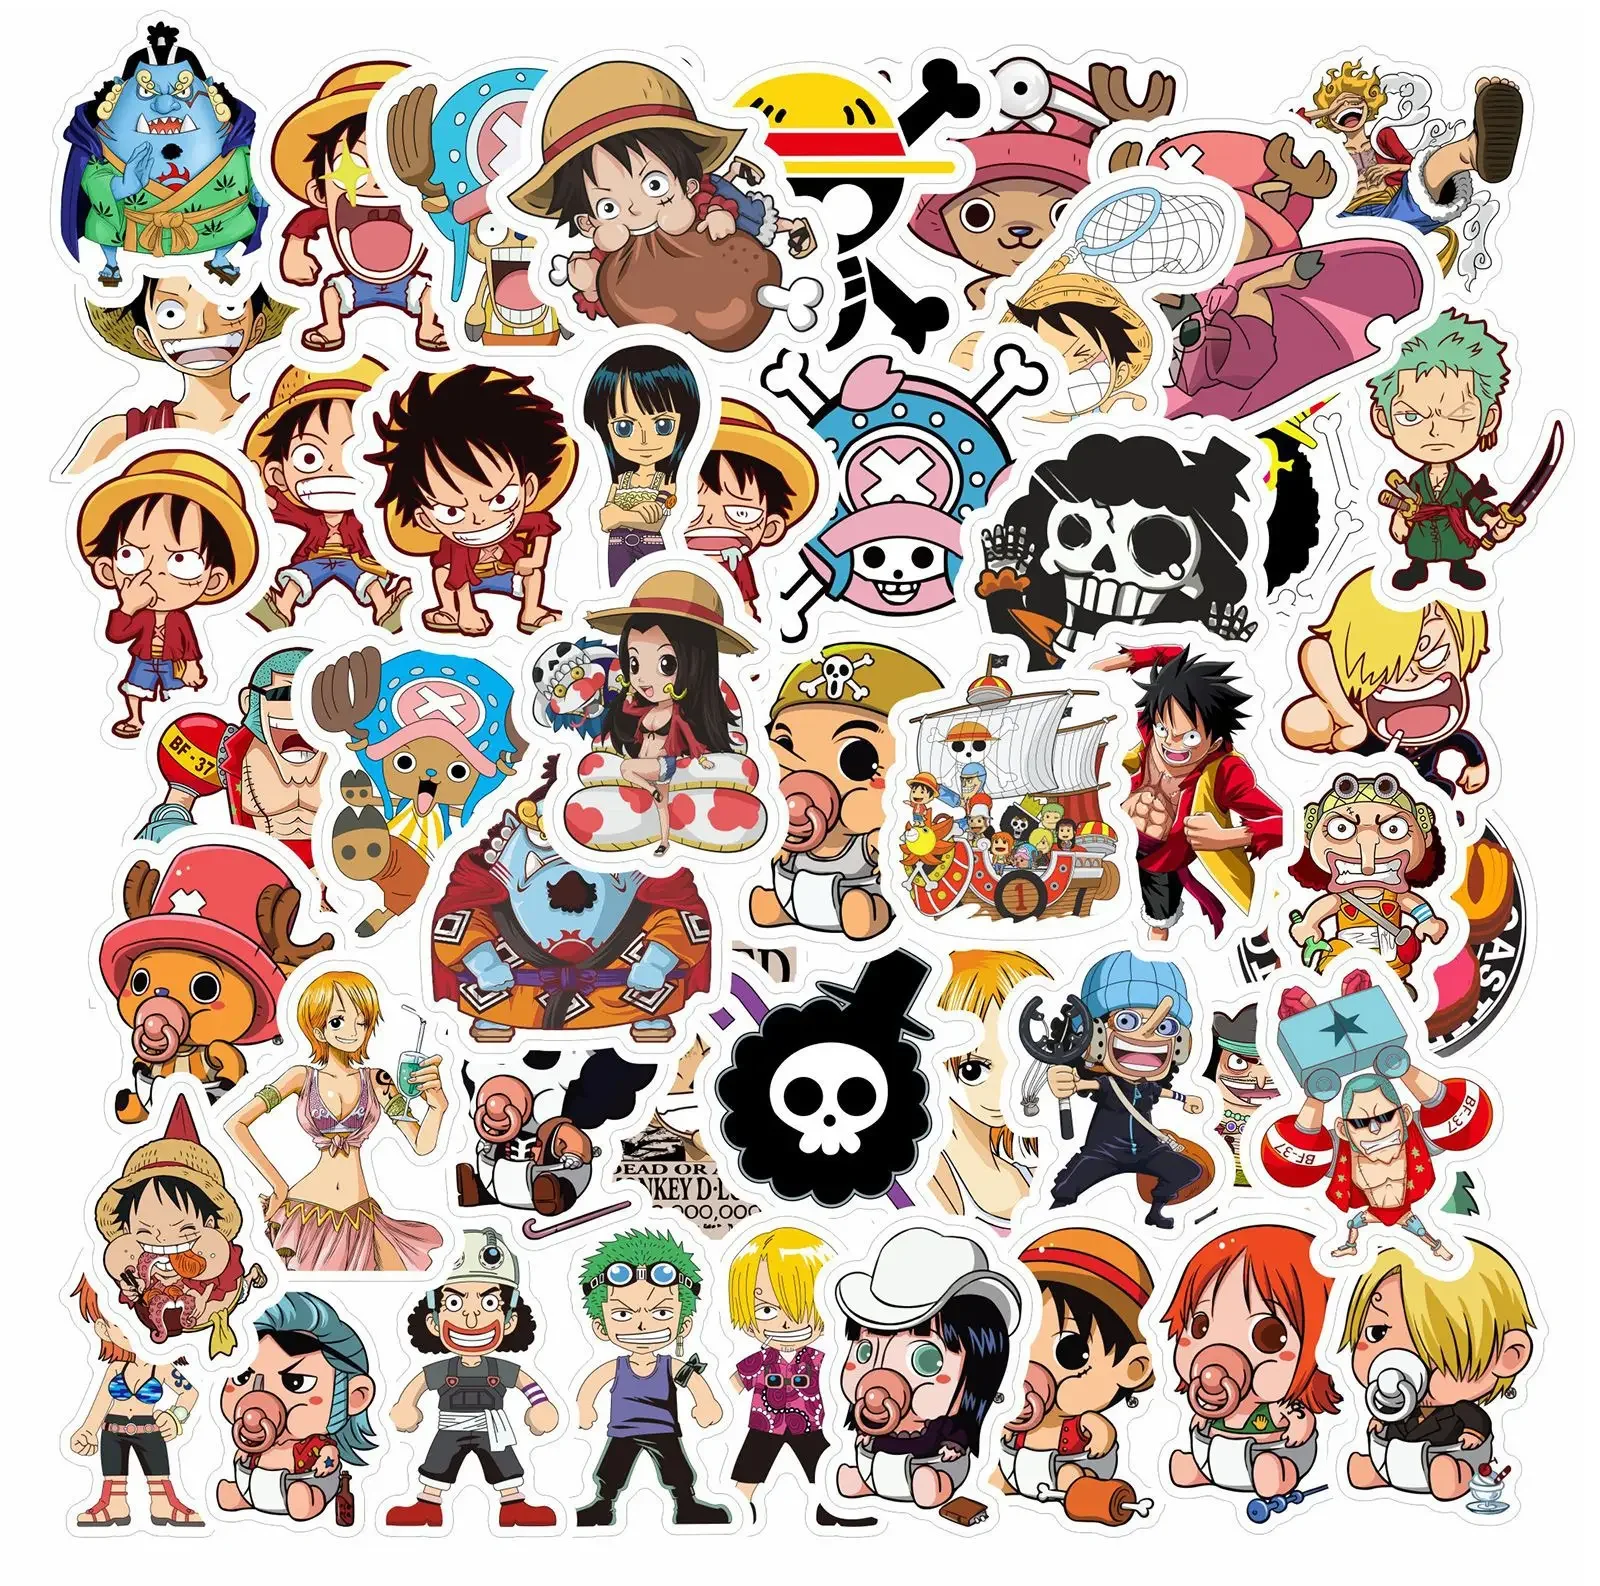 

New 50pcs One Piece Graffiti Waterproof Removable Trolley Case Notebook Car Anime Cartoon Stickers Children's Kawaii Toys Gifts